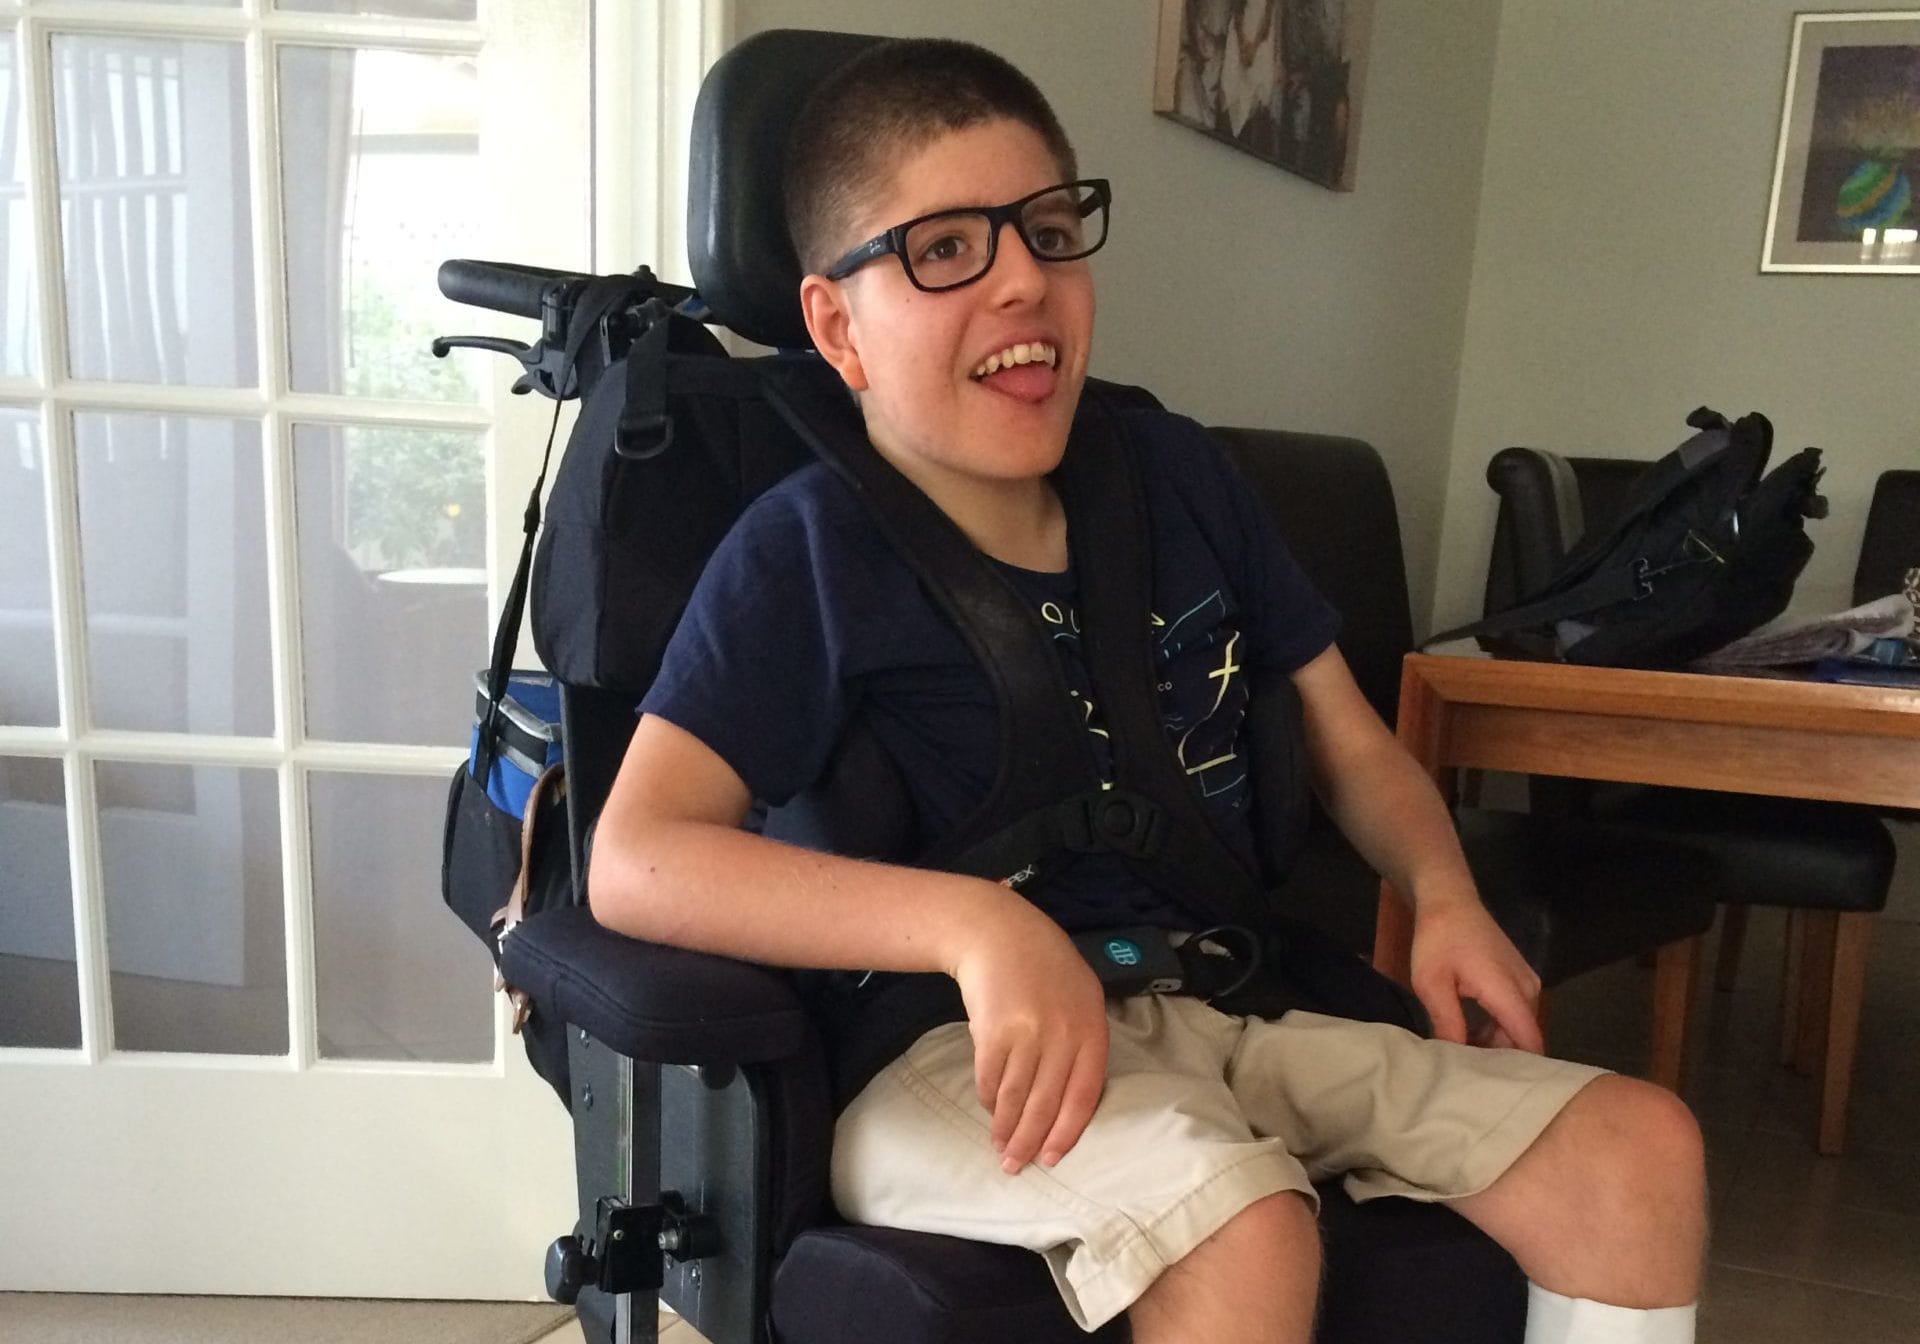 Harrison uses his wheelchair and smiles.